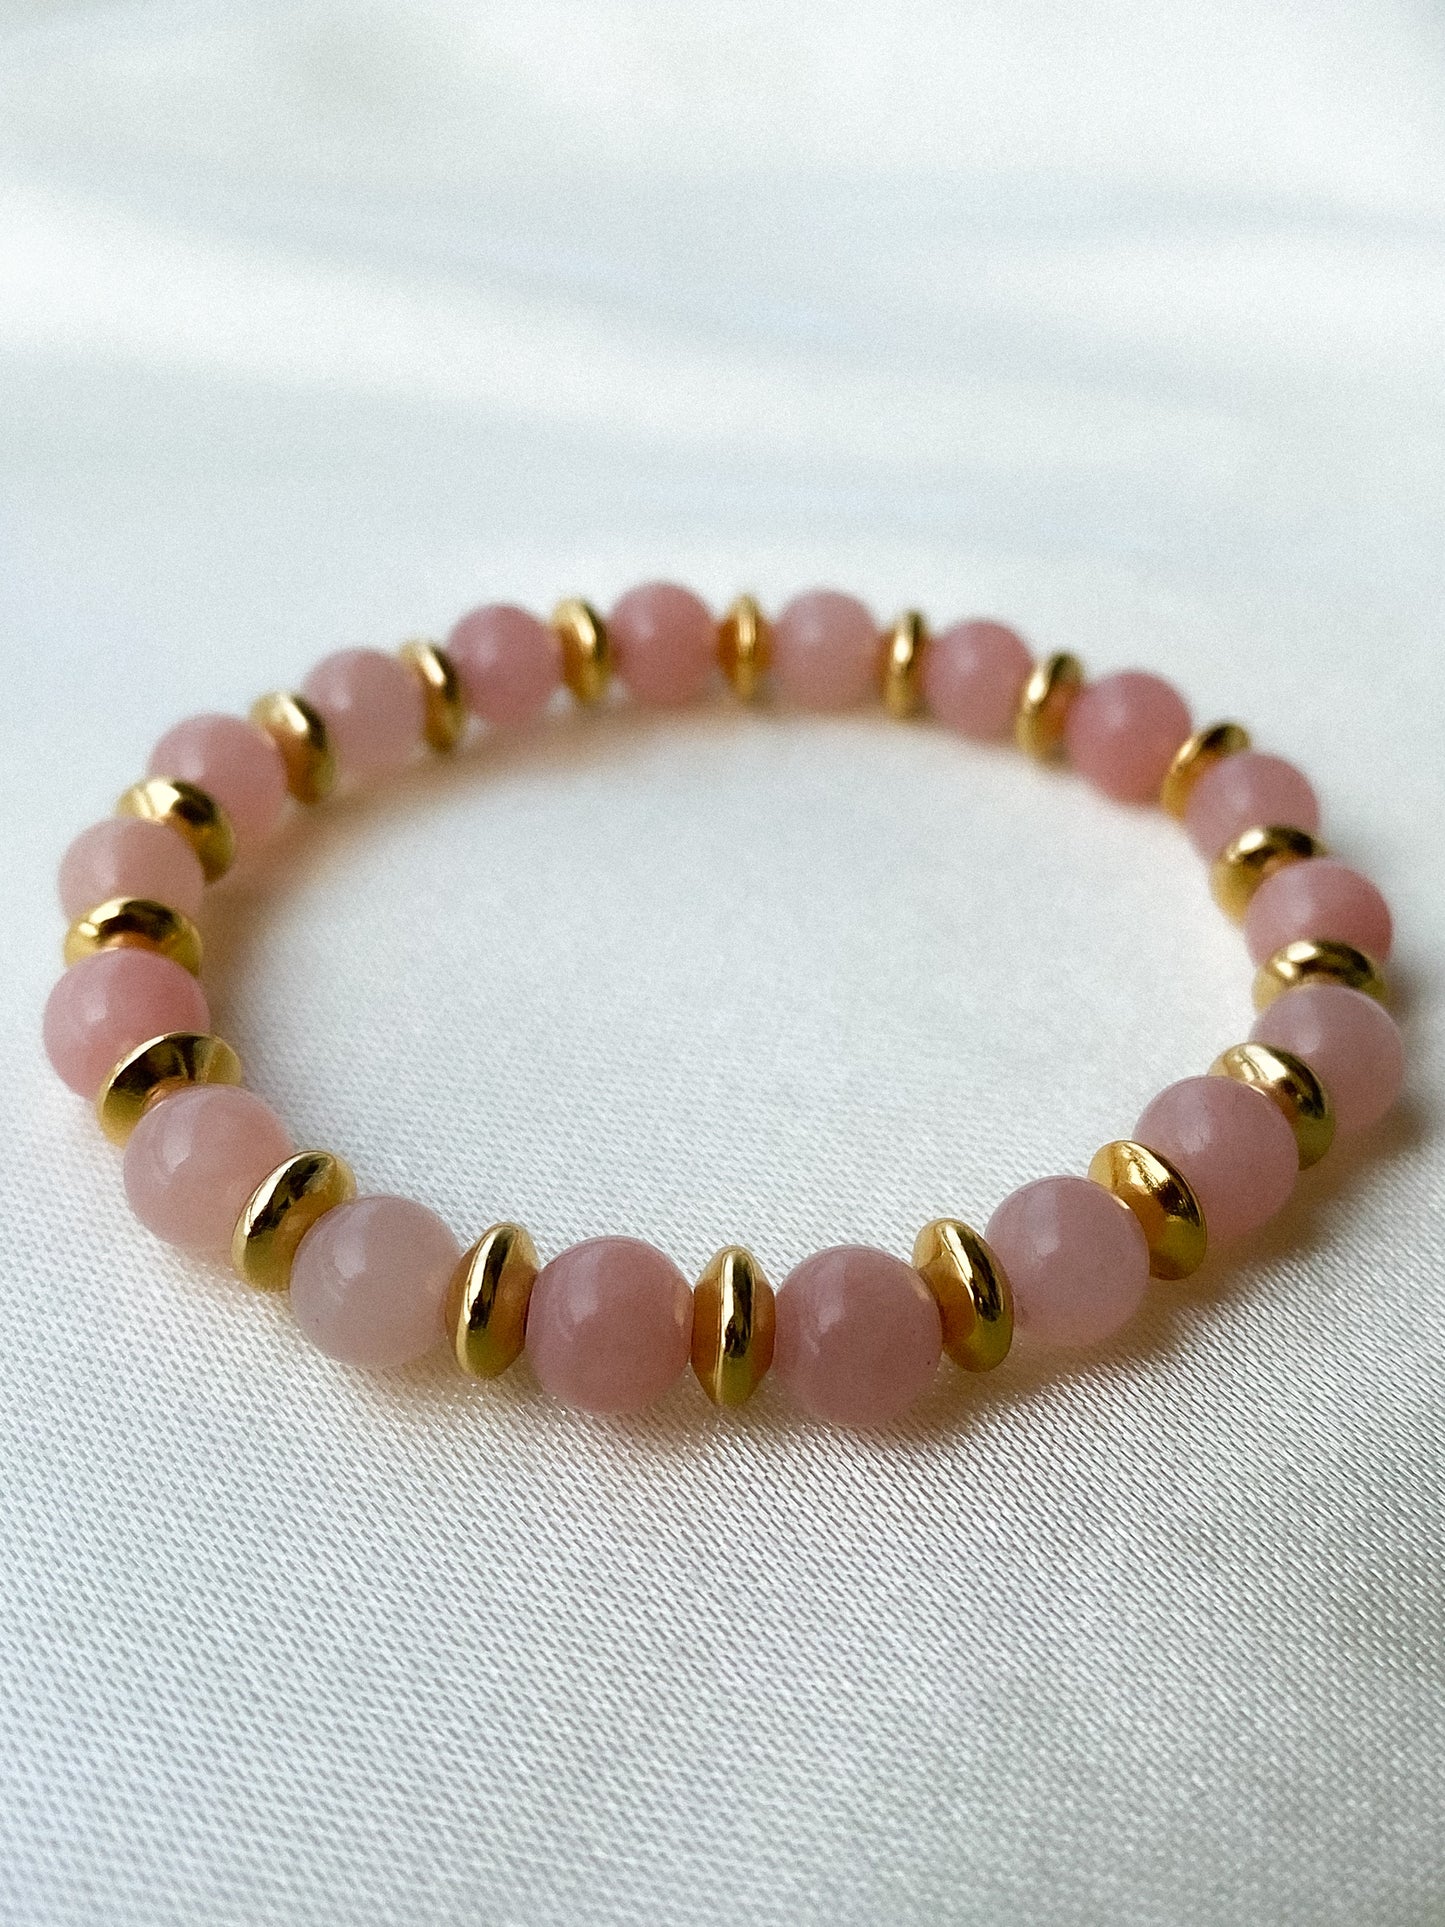 RADIANT CONFIDENCE | Natural stone beads